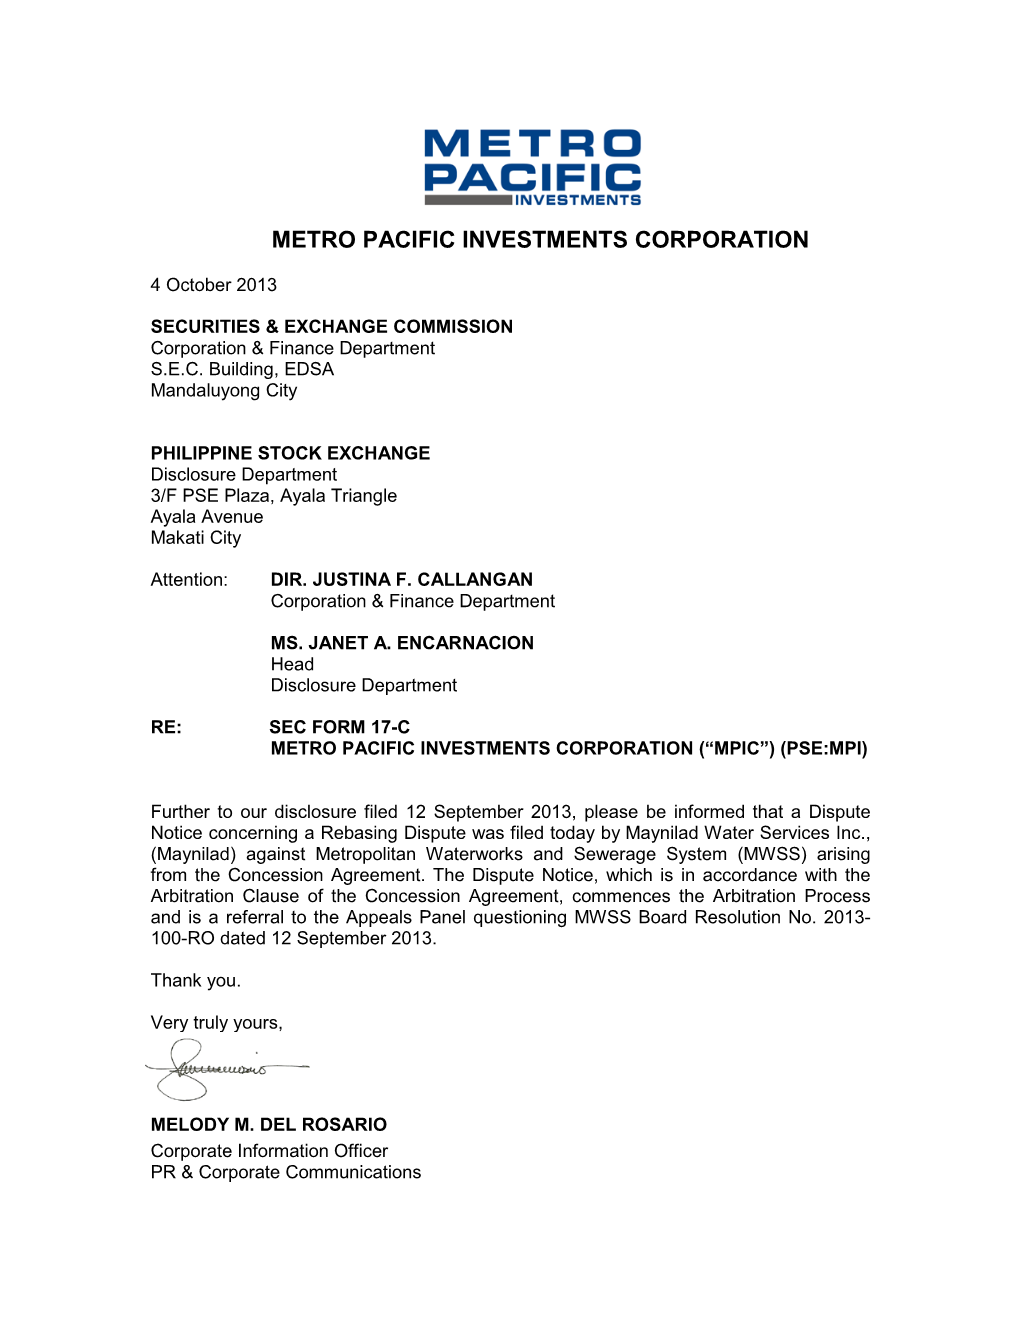 Dispute Notice Filed by Maynilad Water Services Inc. Re Rebasing